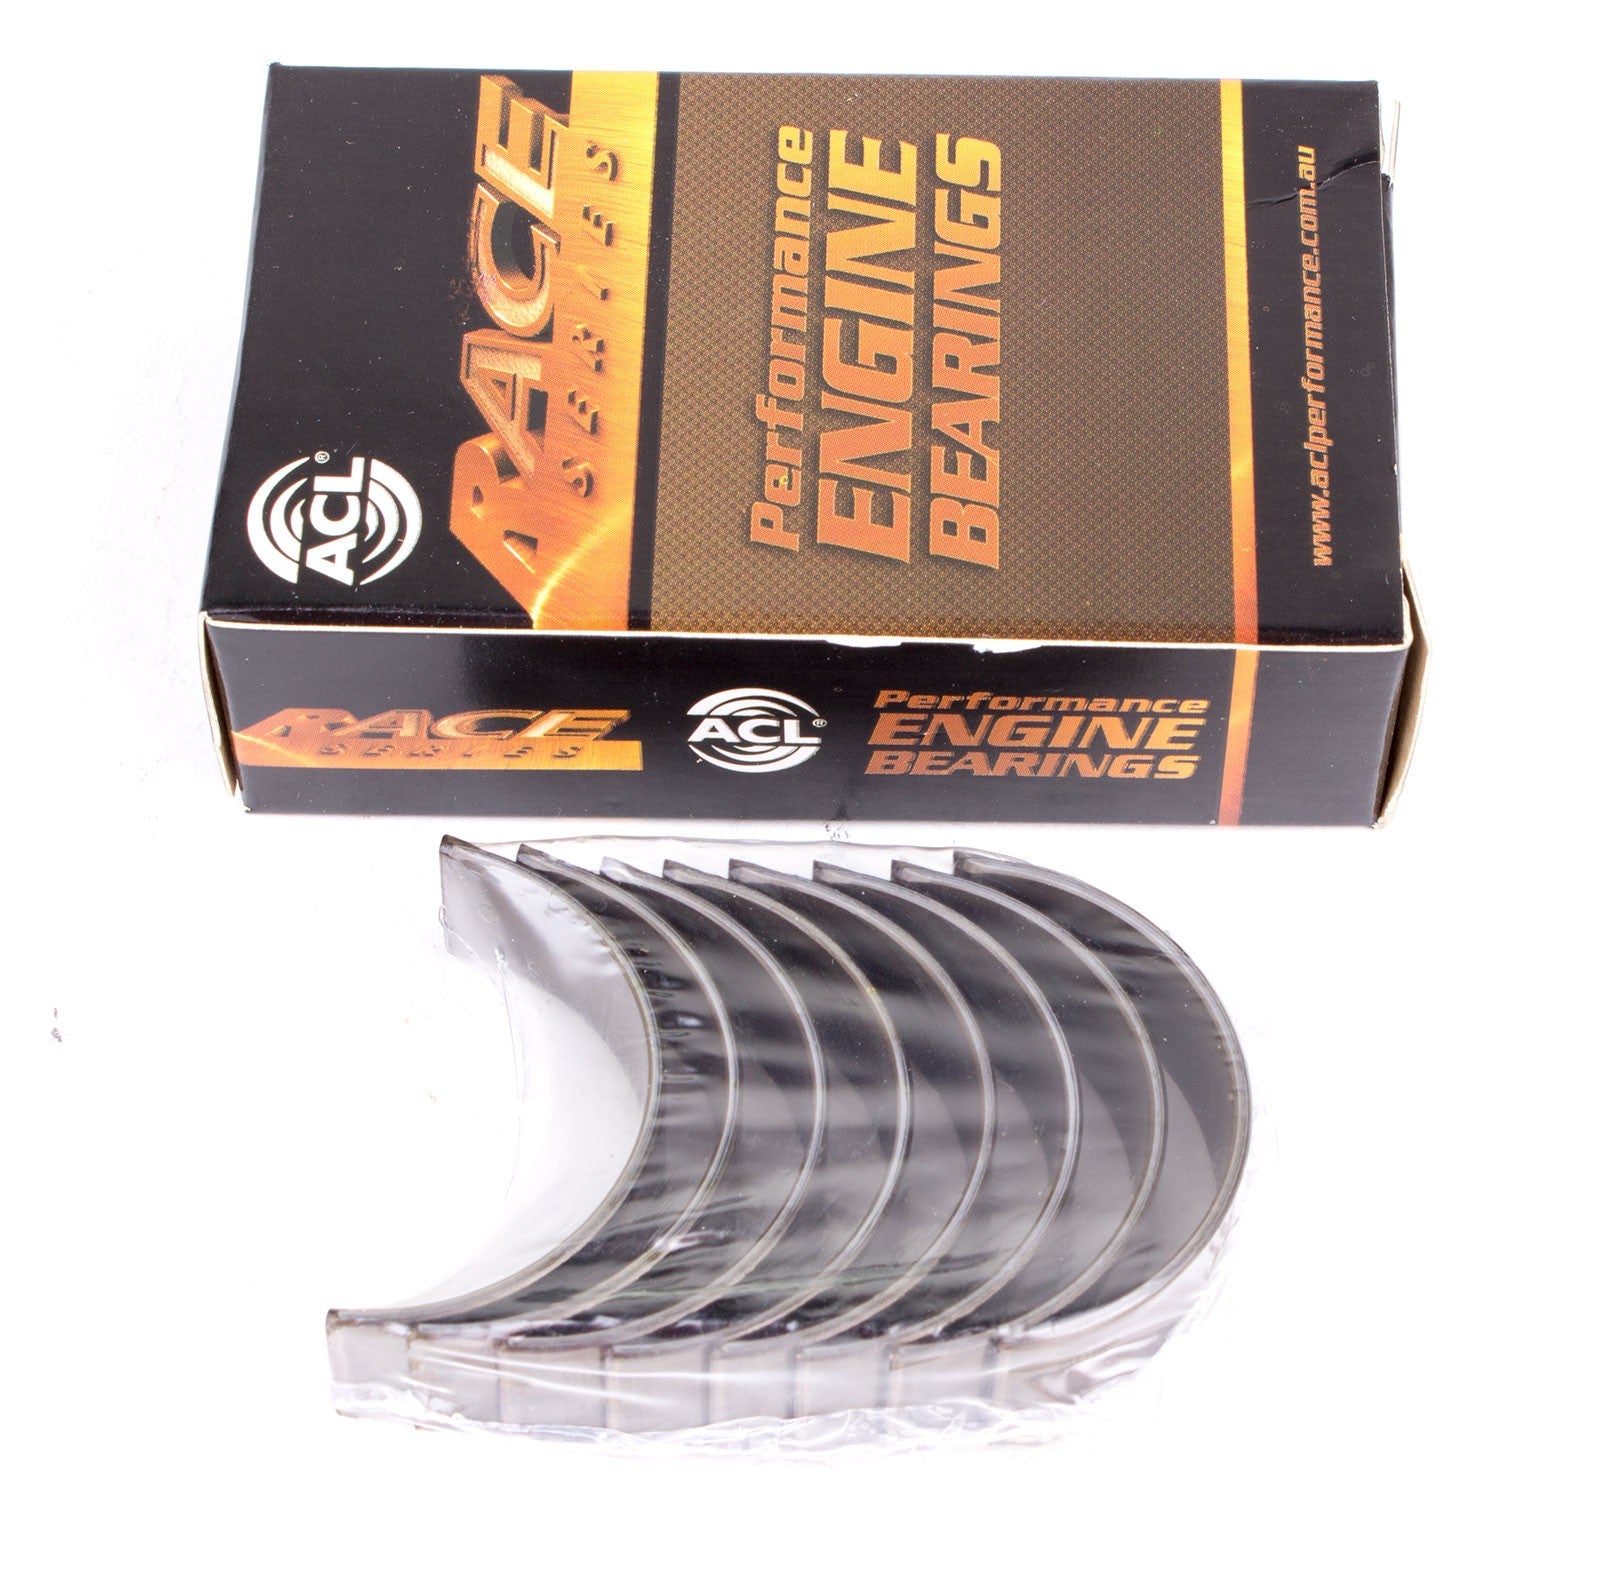 ACL 5M2908H-.25 Main bearing set (ACL Race Series) Photo-0 